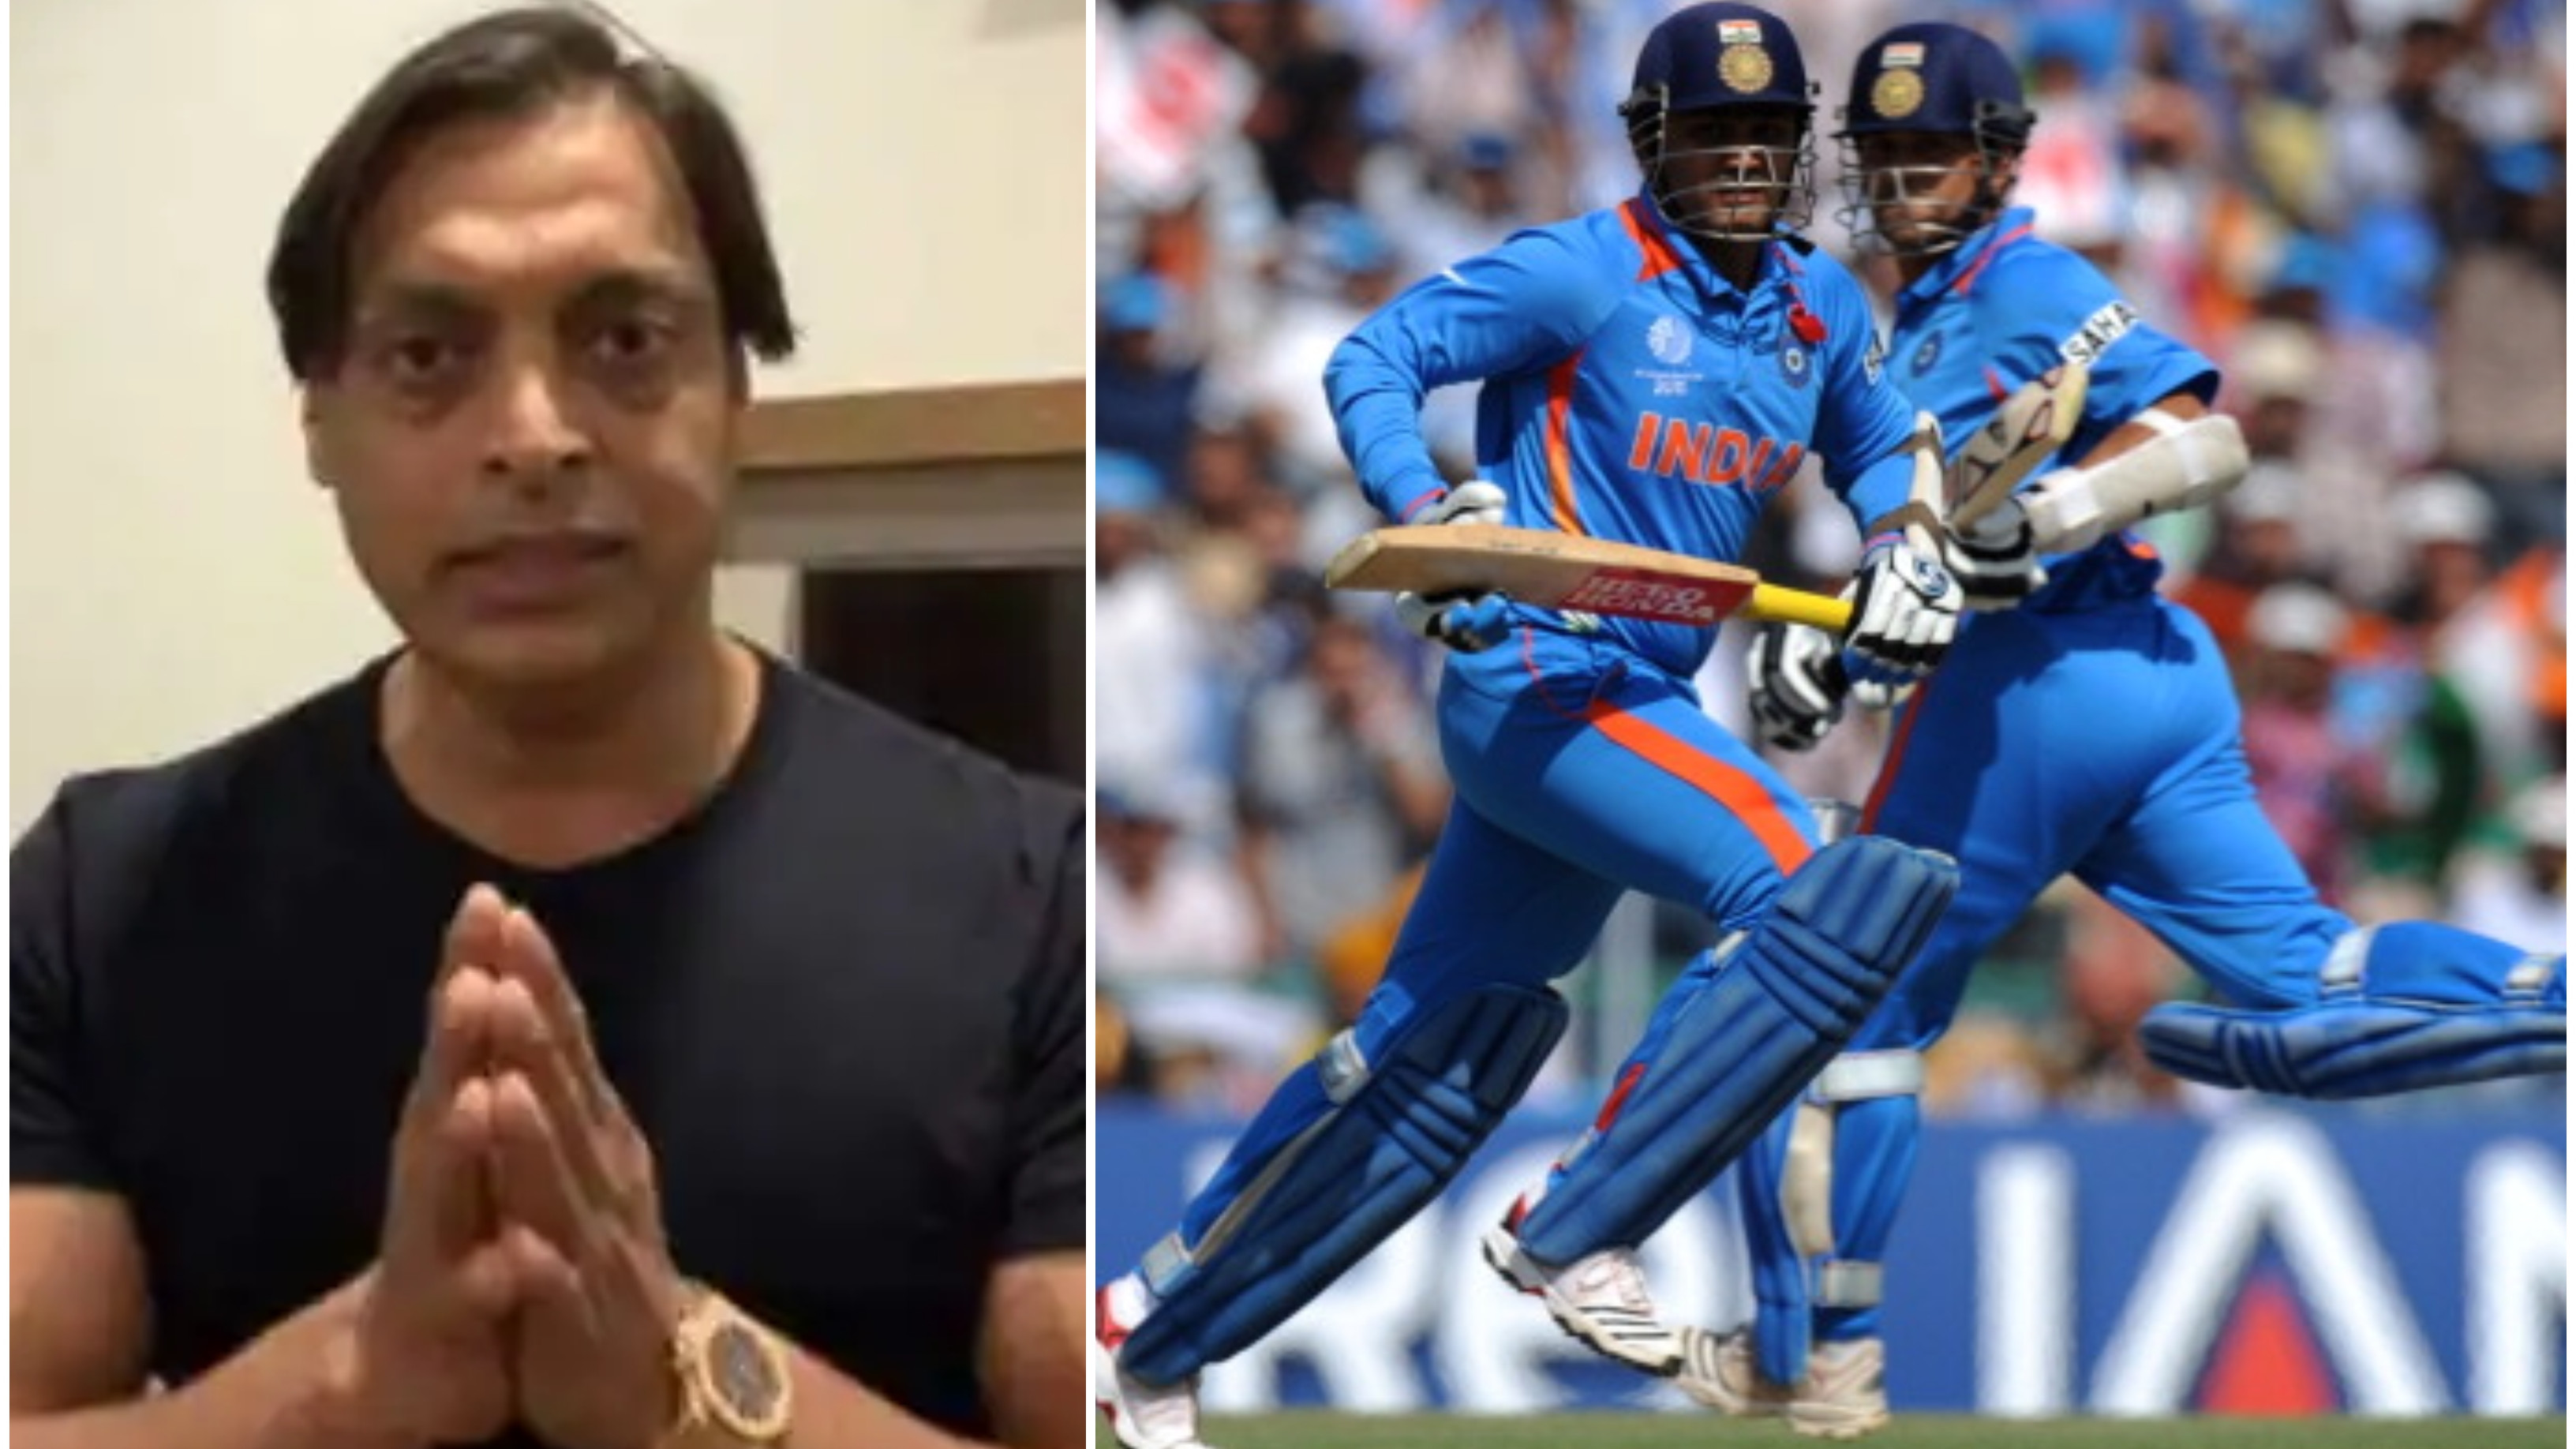 “If I played that match, I would have dismissed Sachin and Sehwag”, Shoaib Akhtar on 2011 World Cup semi-final